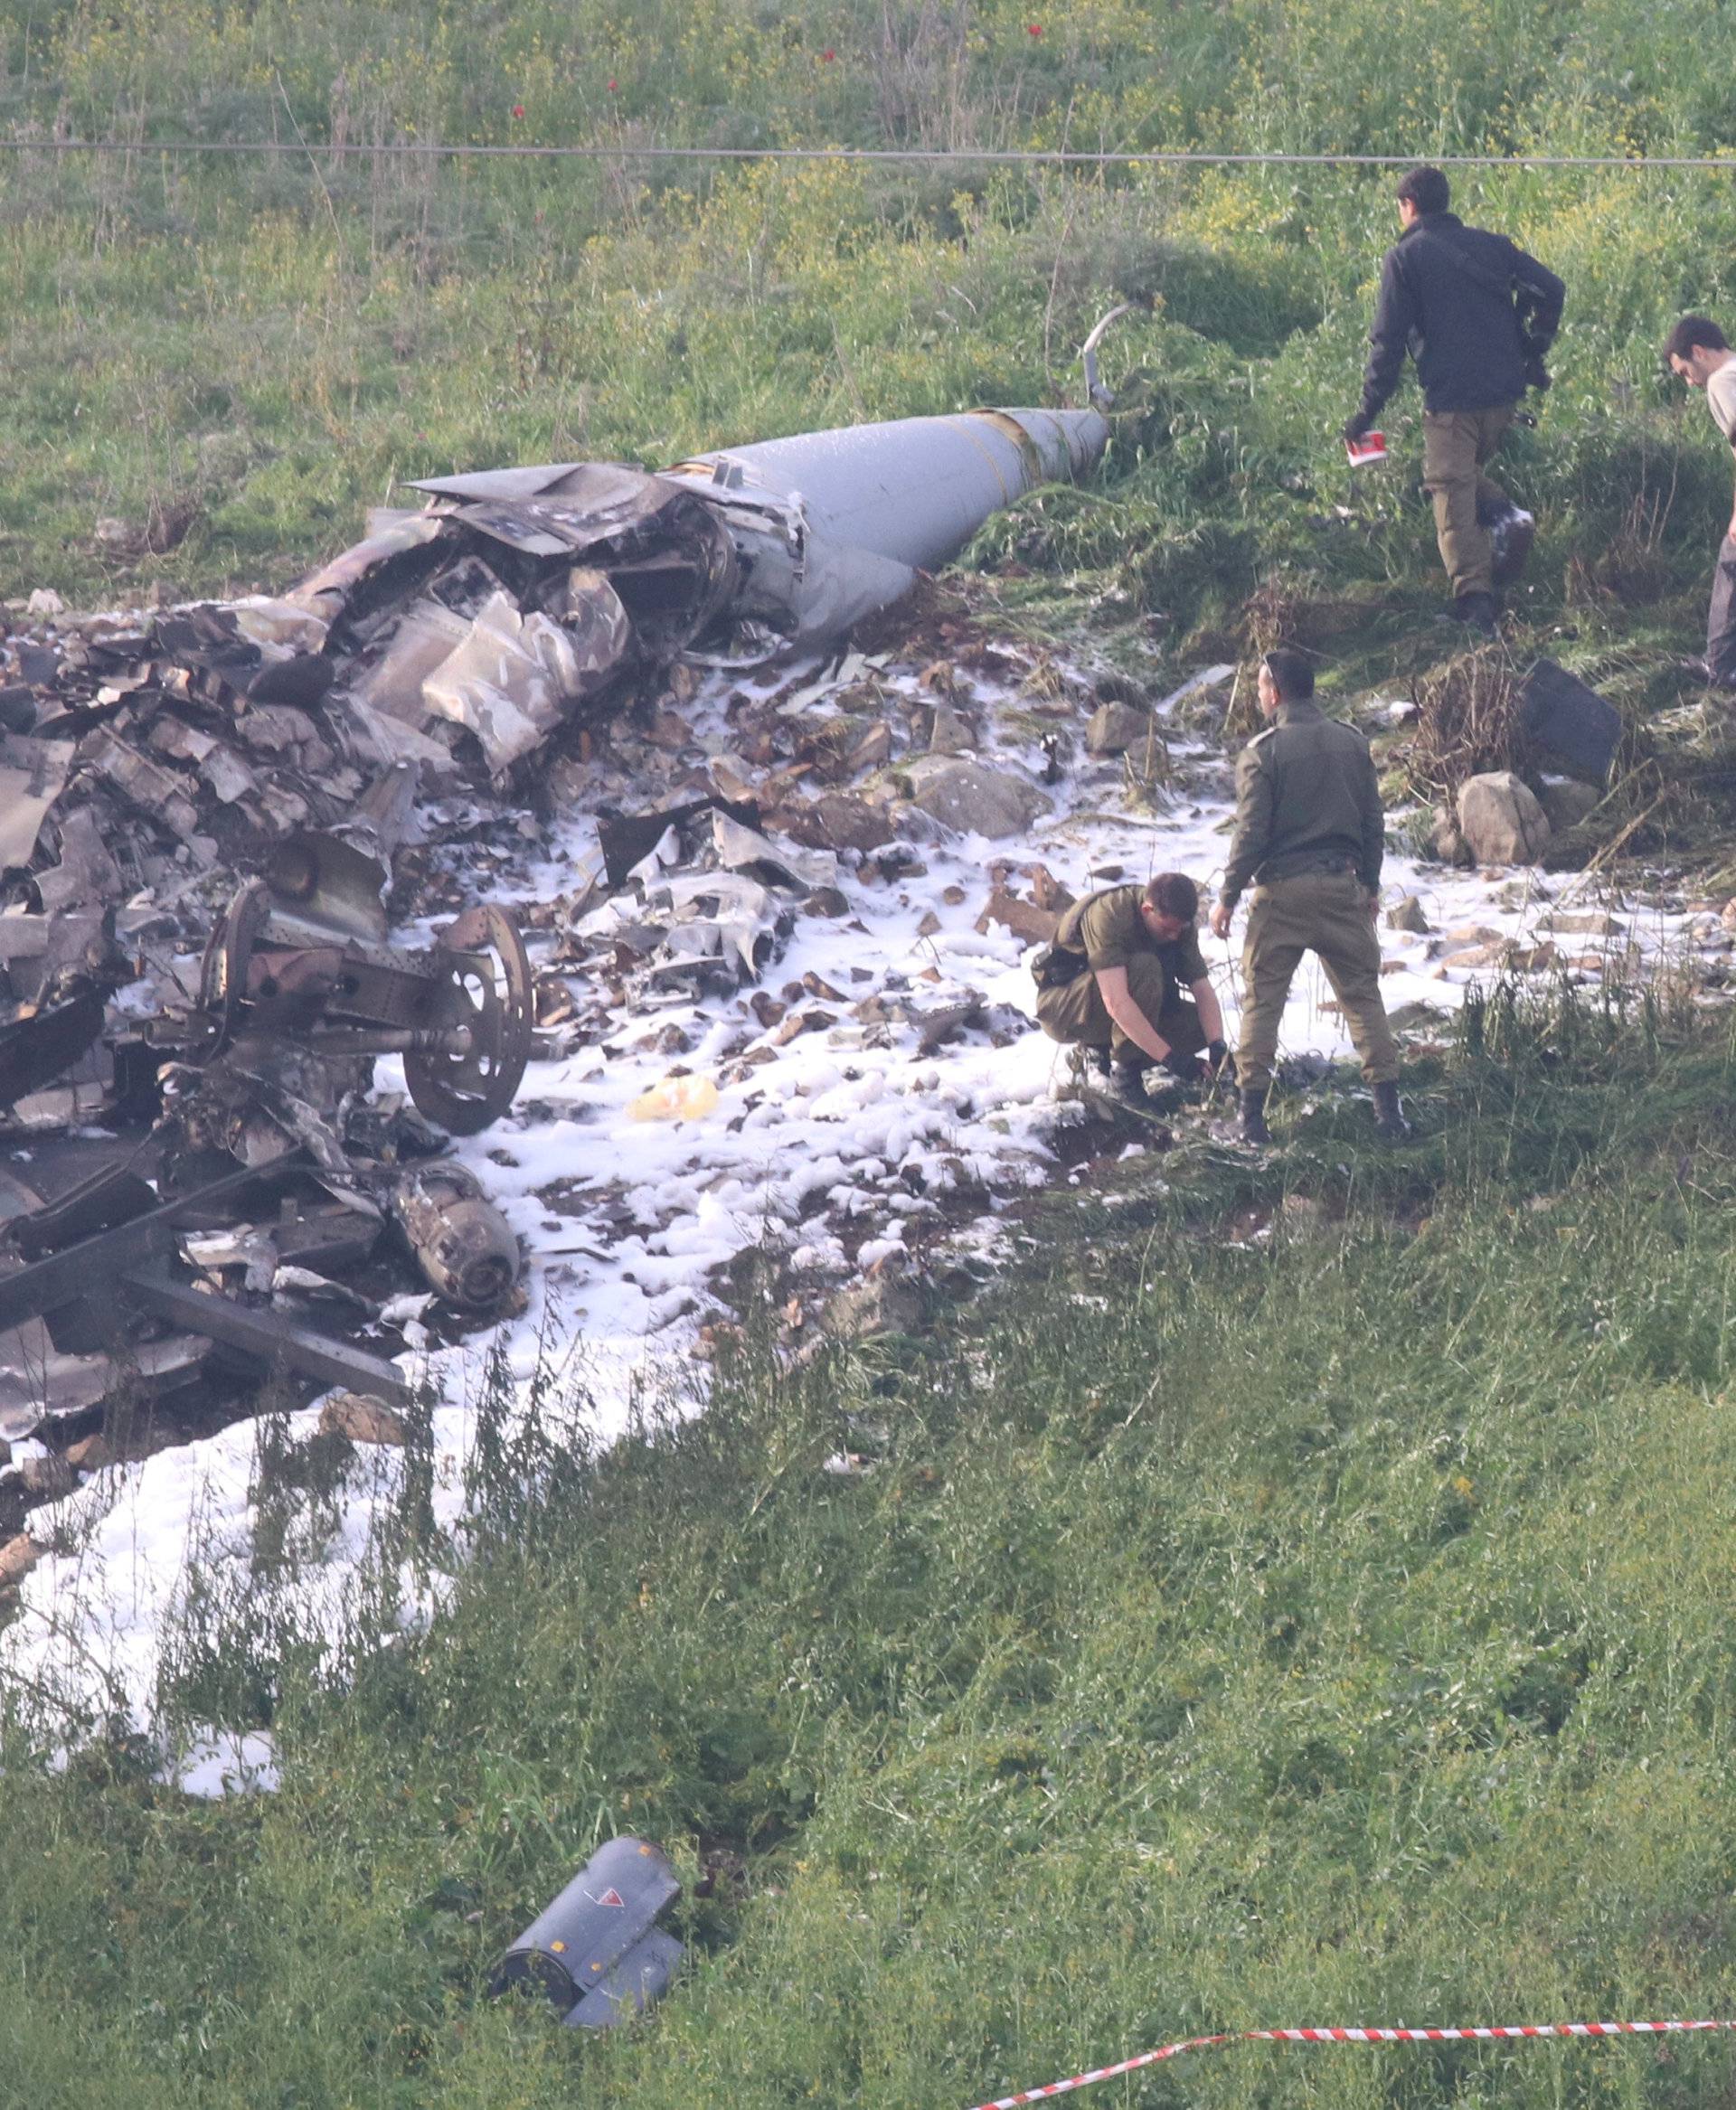 Israeli security forces walk next to the remains of an F-16 Israeli war plane near the Israeli village of Harduf